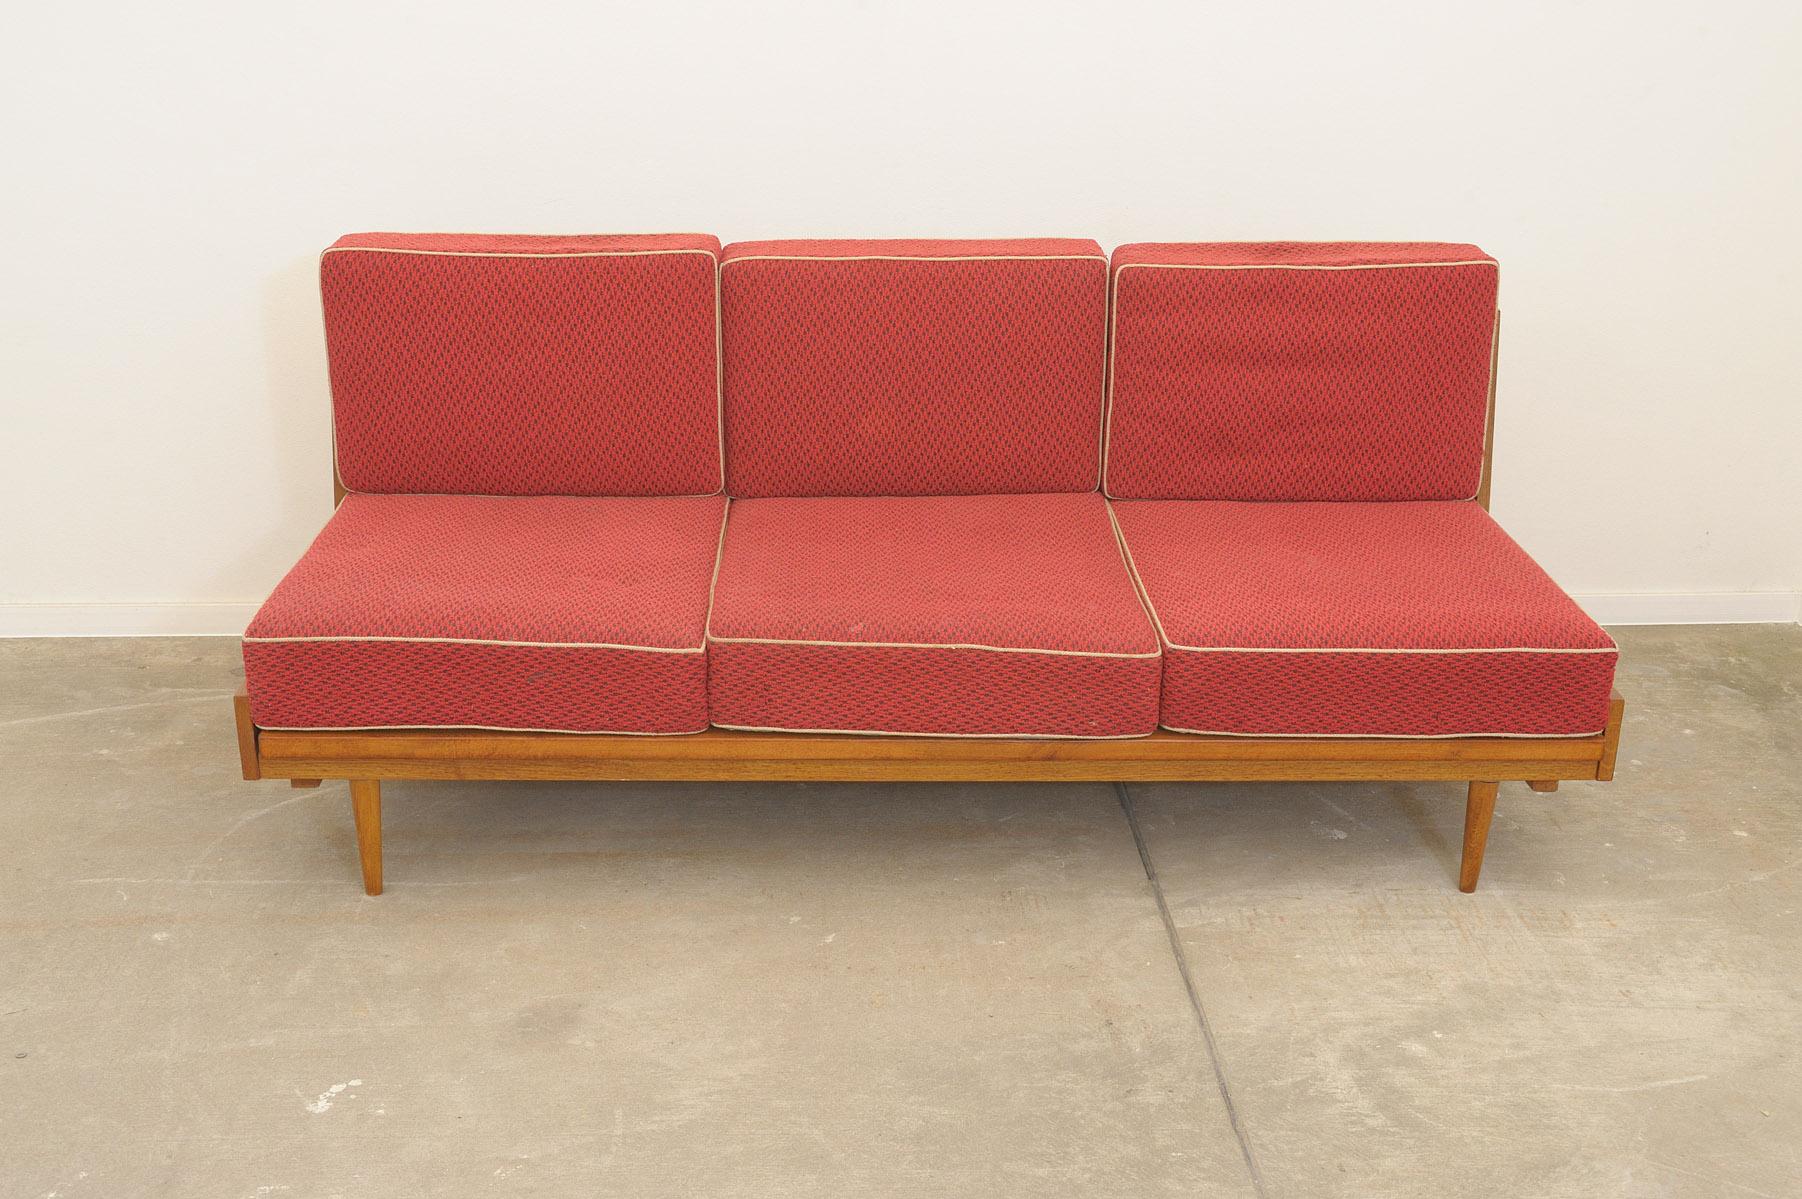 Fabric Midcentury Folding Sofabed by Drevotvar, 1970s, Czechoslovakia For Sale